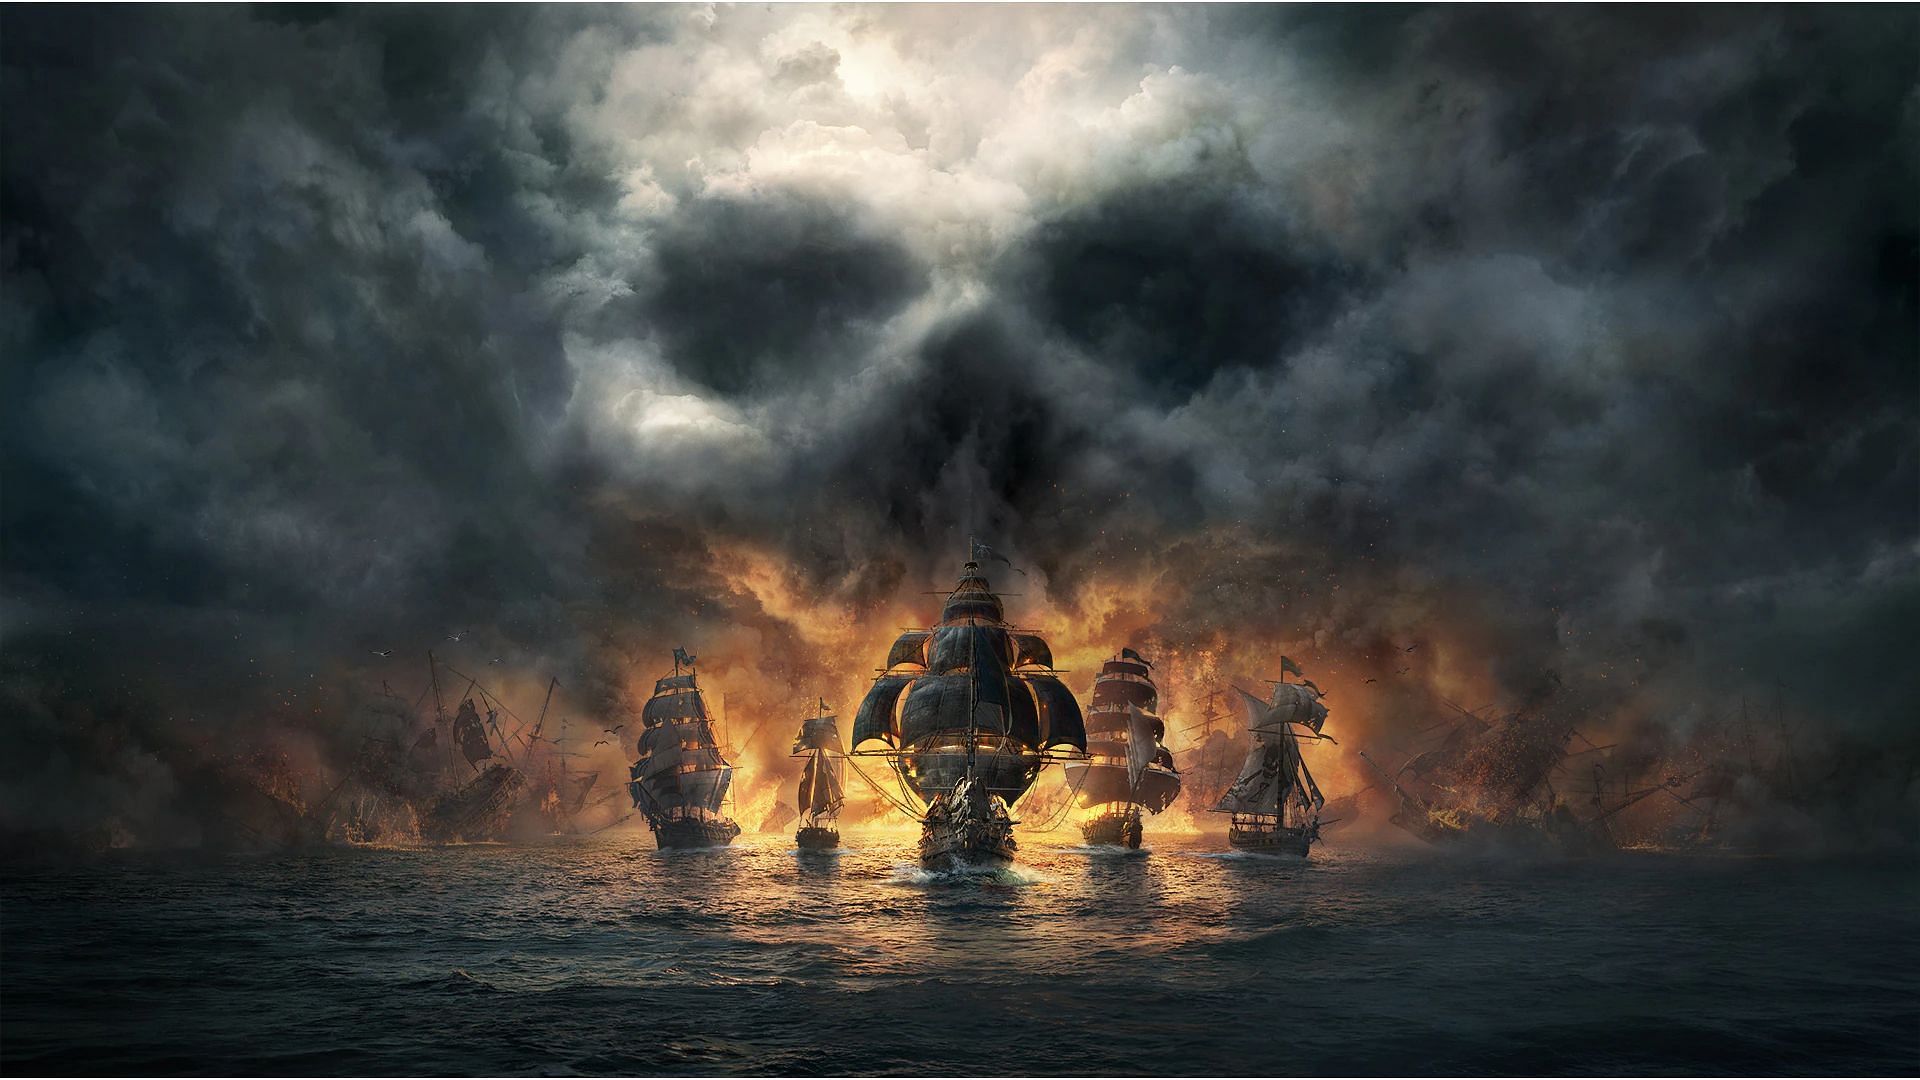 Skull and Bones will see players sail the Indian Ocean in hopes of fame and fortune (Image via Ubisoft)